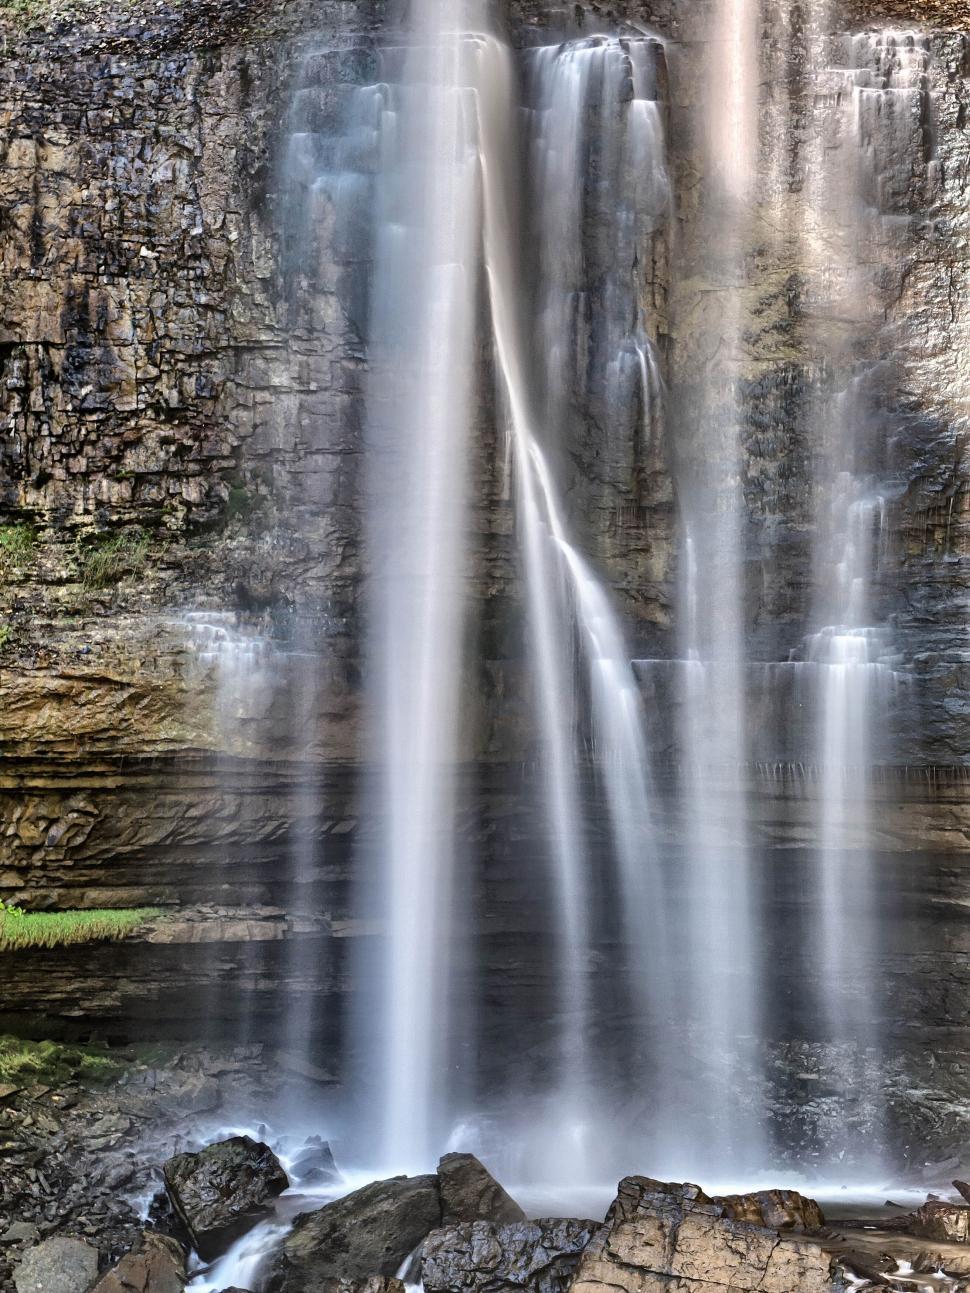 Free Image of Elegant waterfall cascading down a rocky cliff face 